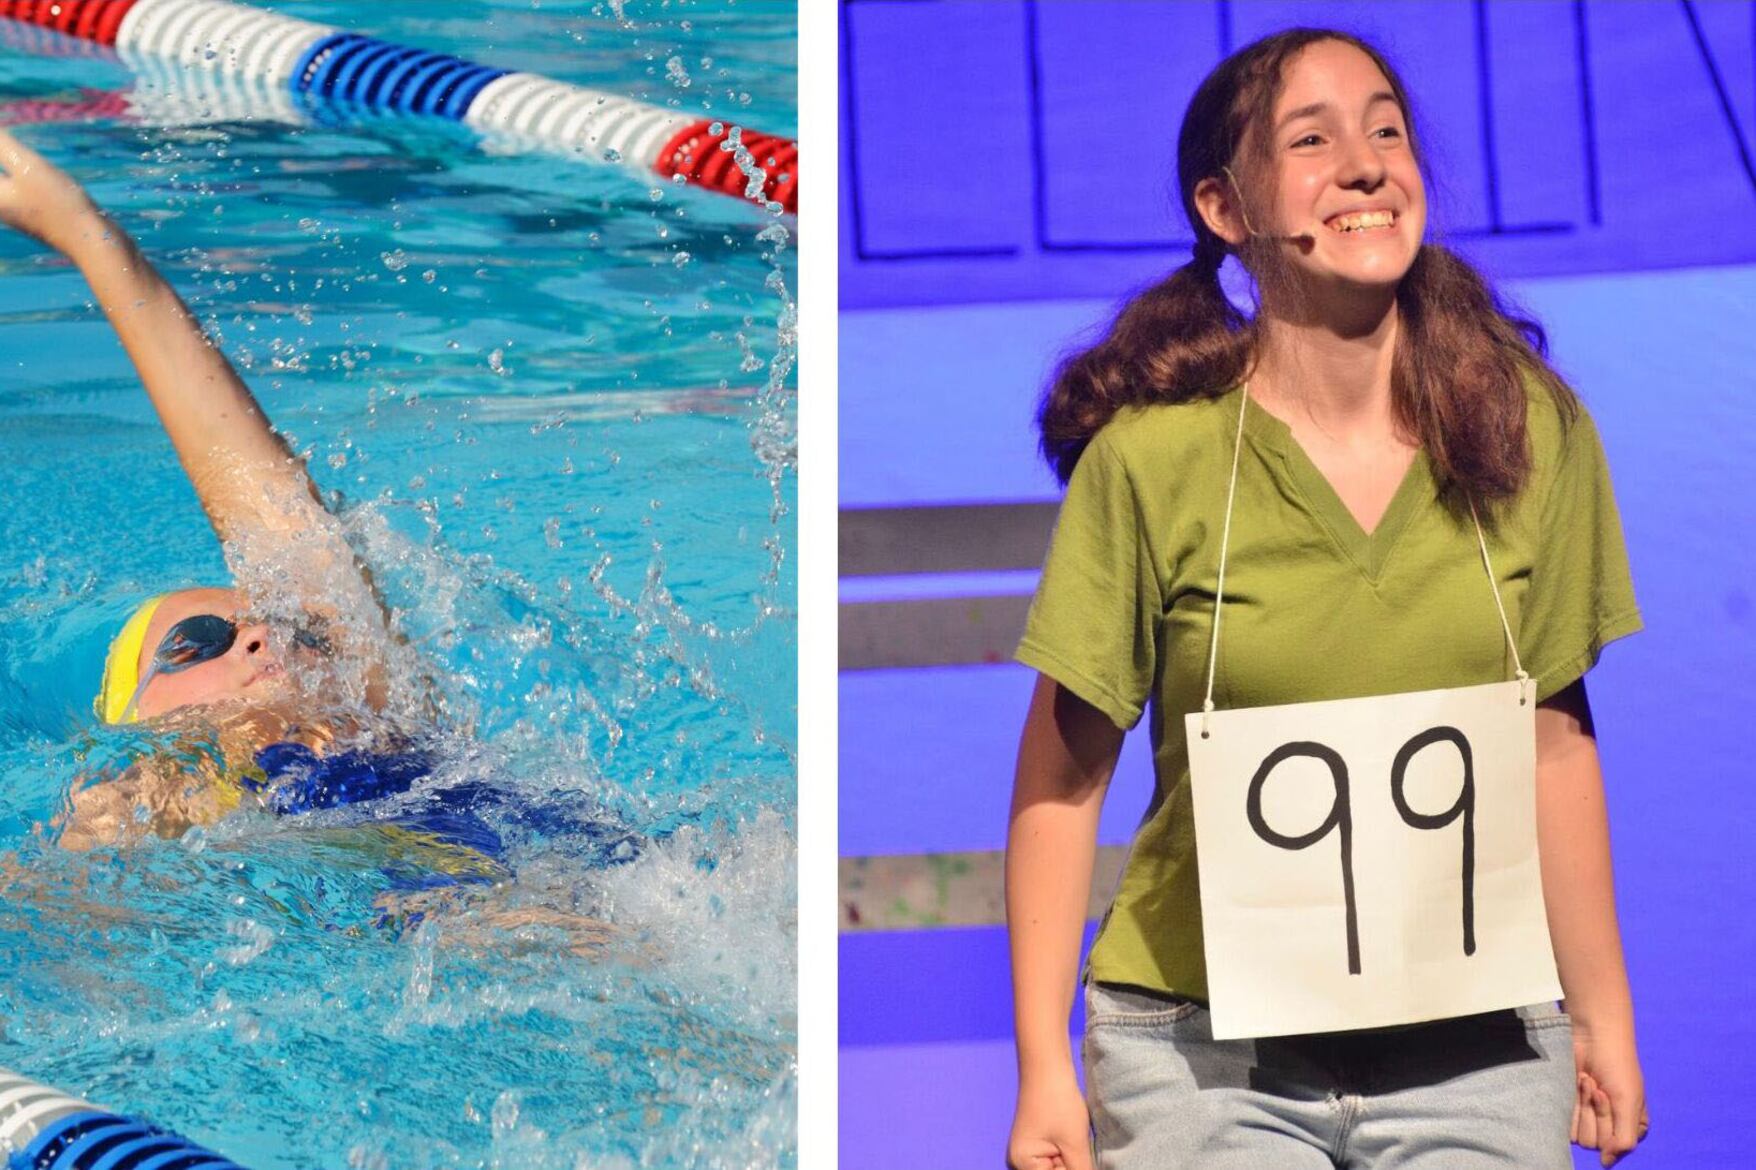 Left, A young person swimming in a pool and right, a photo of a student with long dark hair in two ponytails and wearing a green shirt and a white sign with black numbers reading "99" around her neck during a competition.